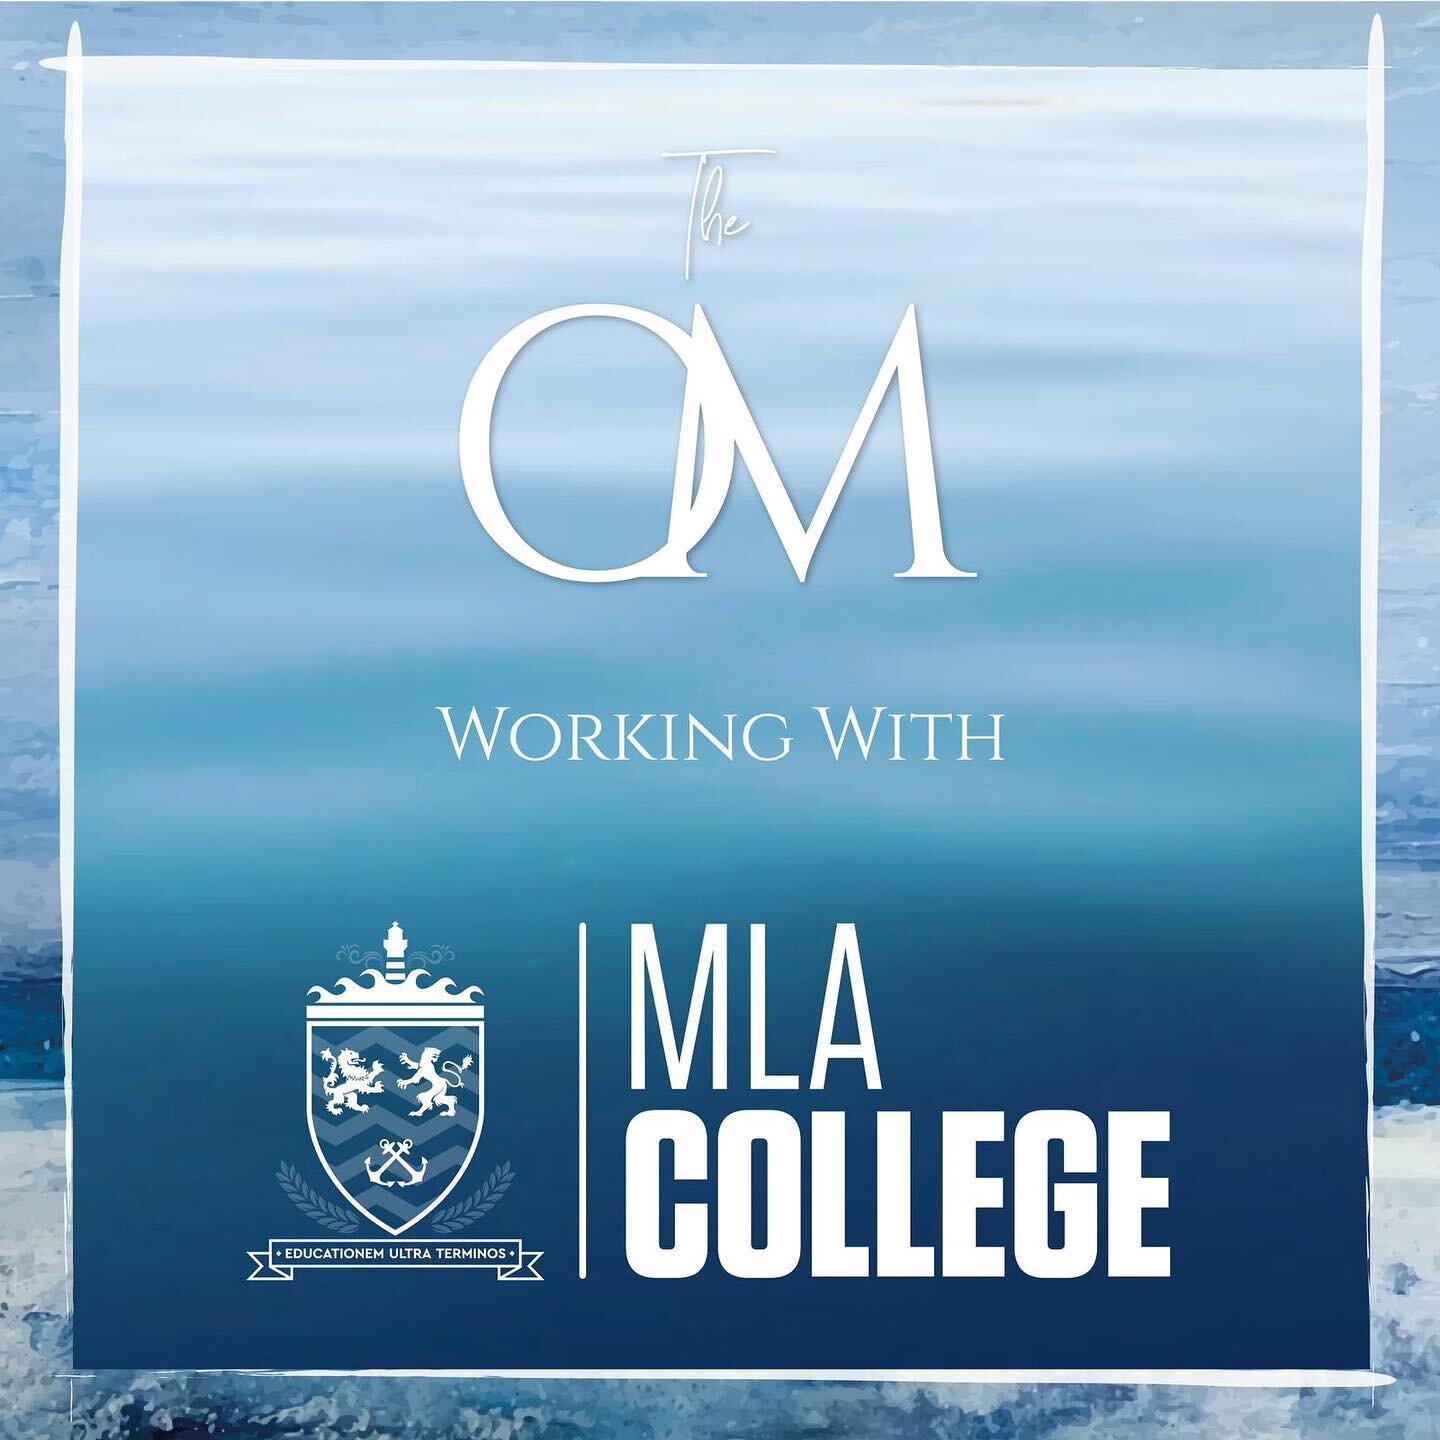 This years Monaco Yacht Show continues to have a strong focus on sustainability in all its guises from design to drive, environmental, technical and operational solutions. 

The OM works in partnership with MLA College to help promote and develop the